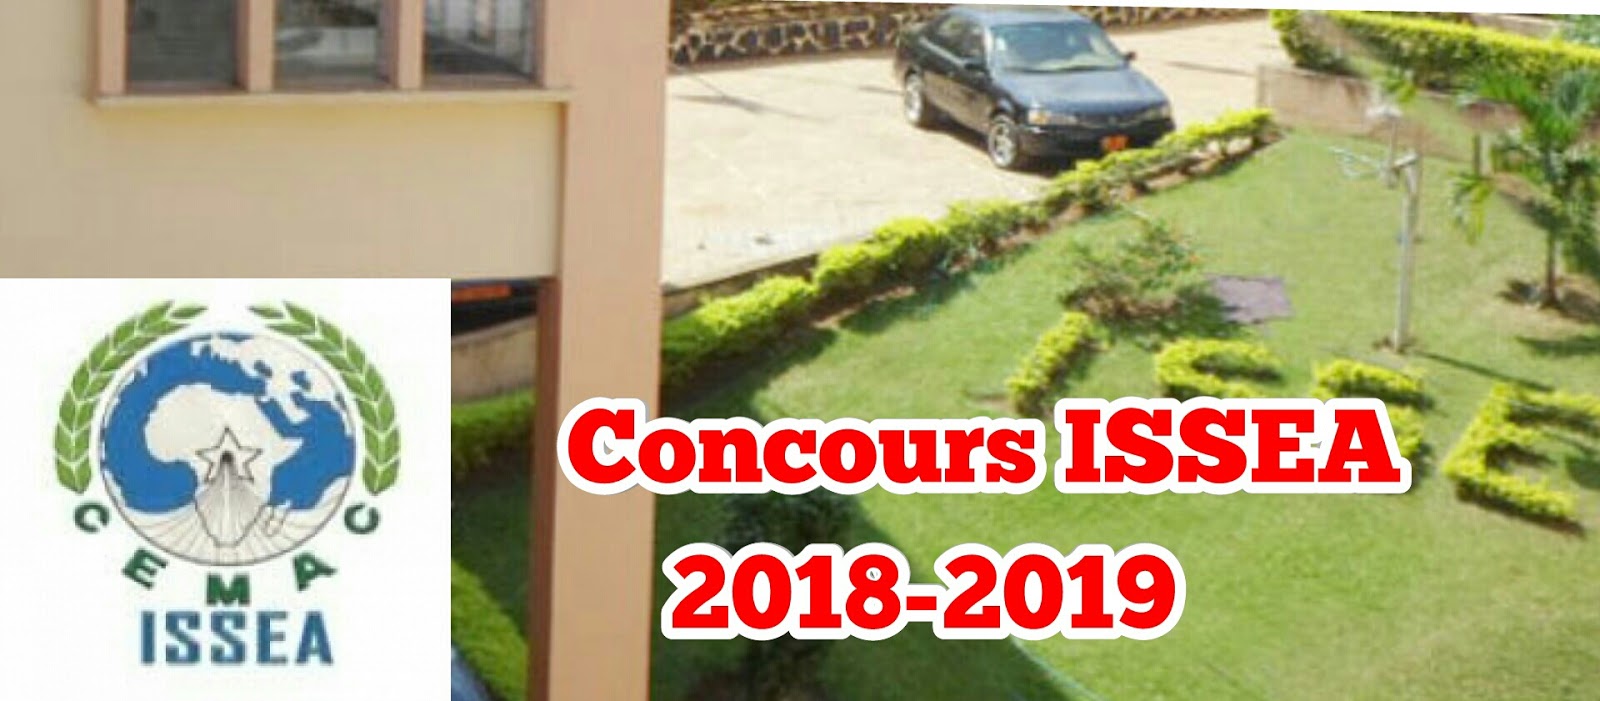 Concours ISSEA TSS 2018-2019